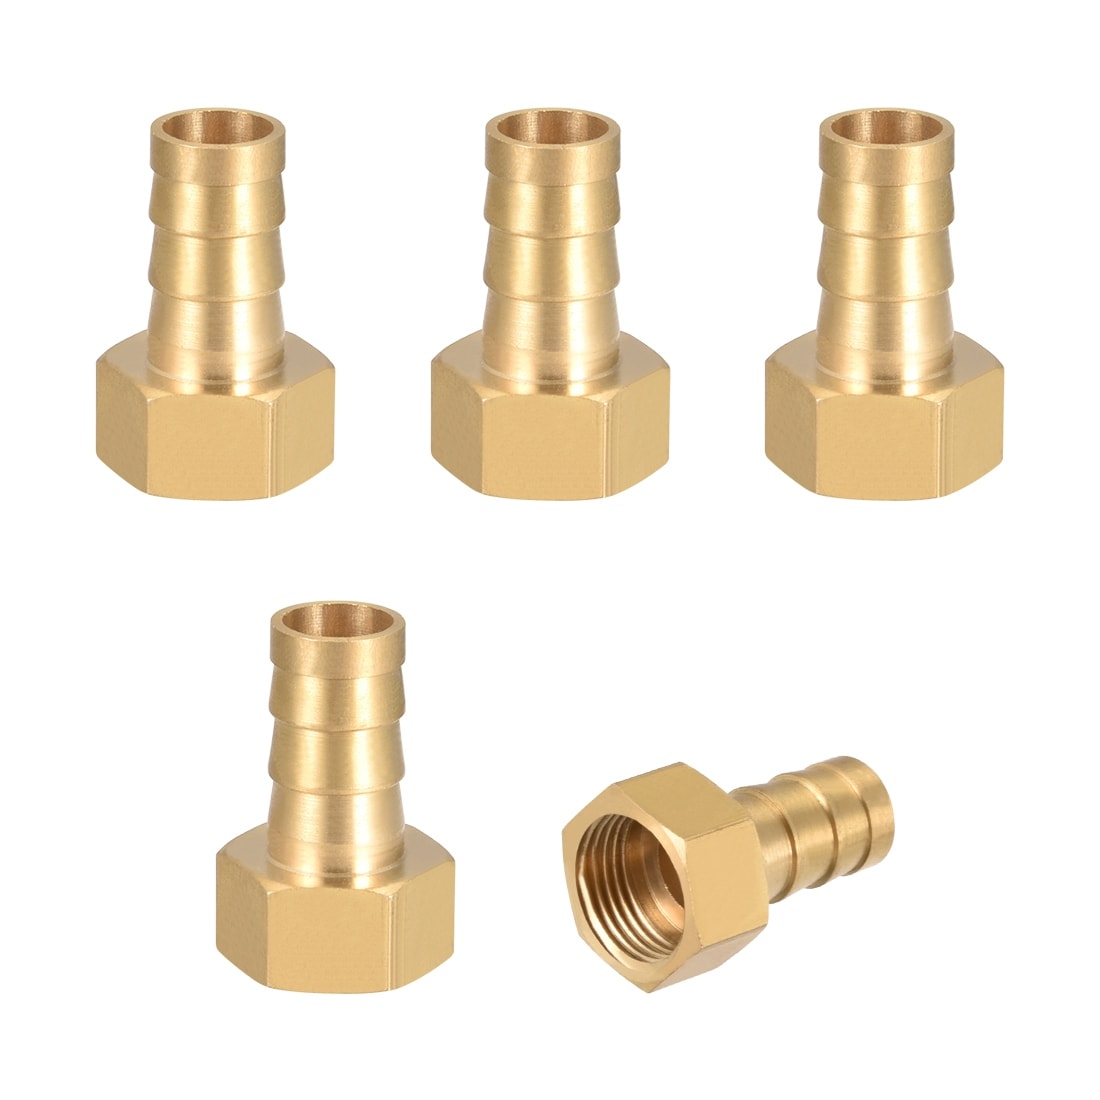 5pcs 1/4" BSPP Female-10mm barbed Hose Brass Pipe Connector Adapter Fitting 